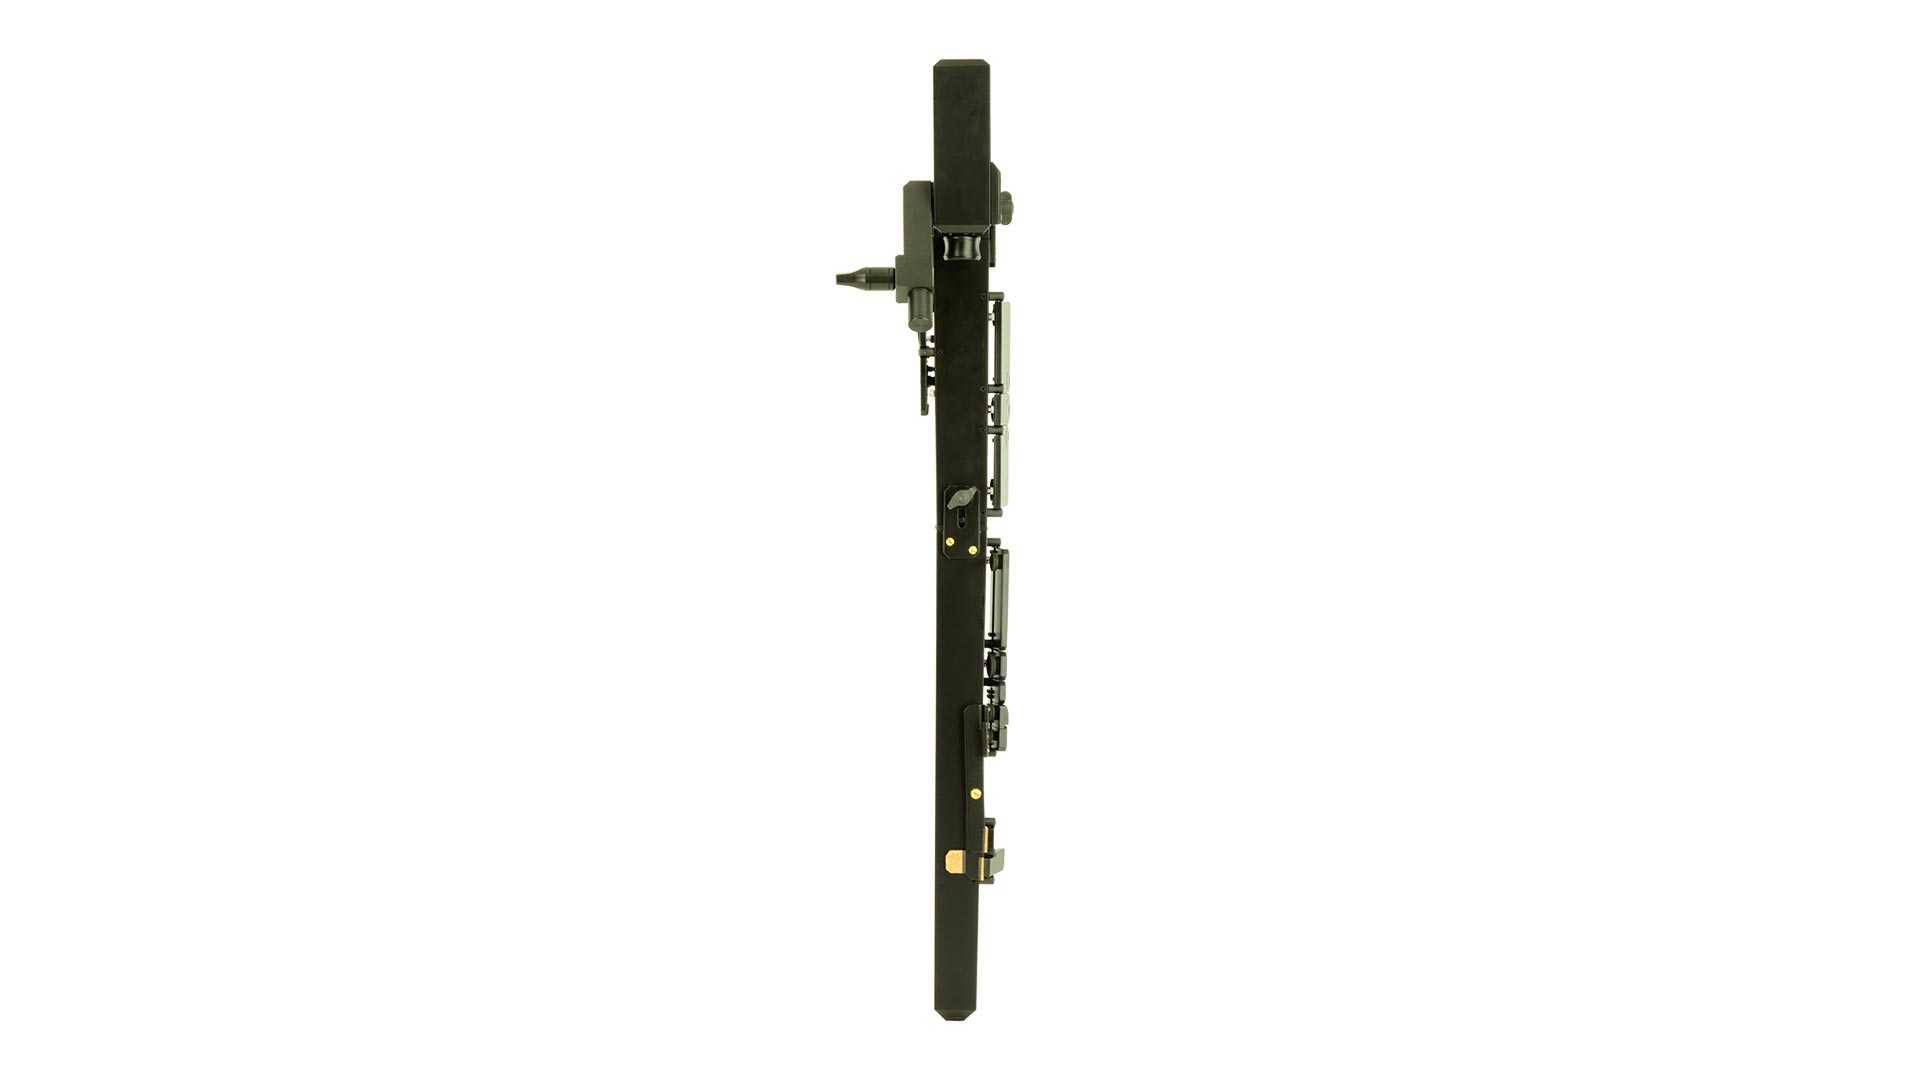 Paetzold by Kunath, basset recorder in f, "Master", "HP Original", 442 Hz, black lacquered, birch wo